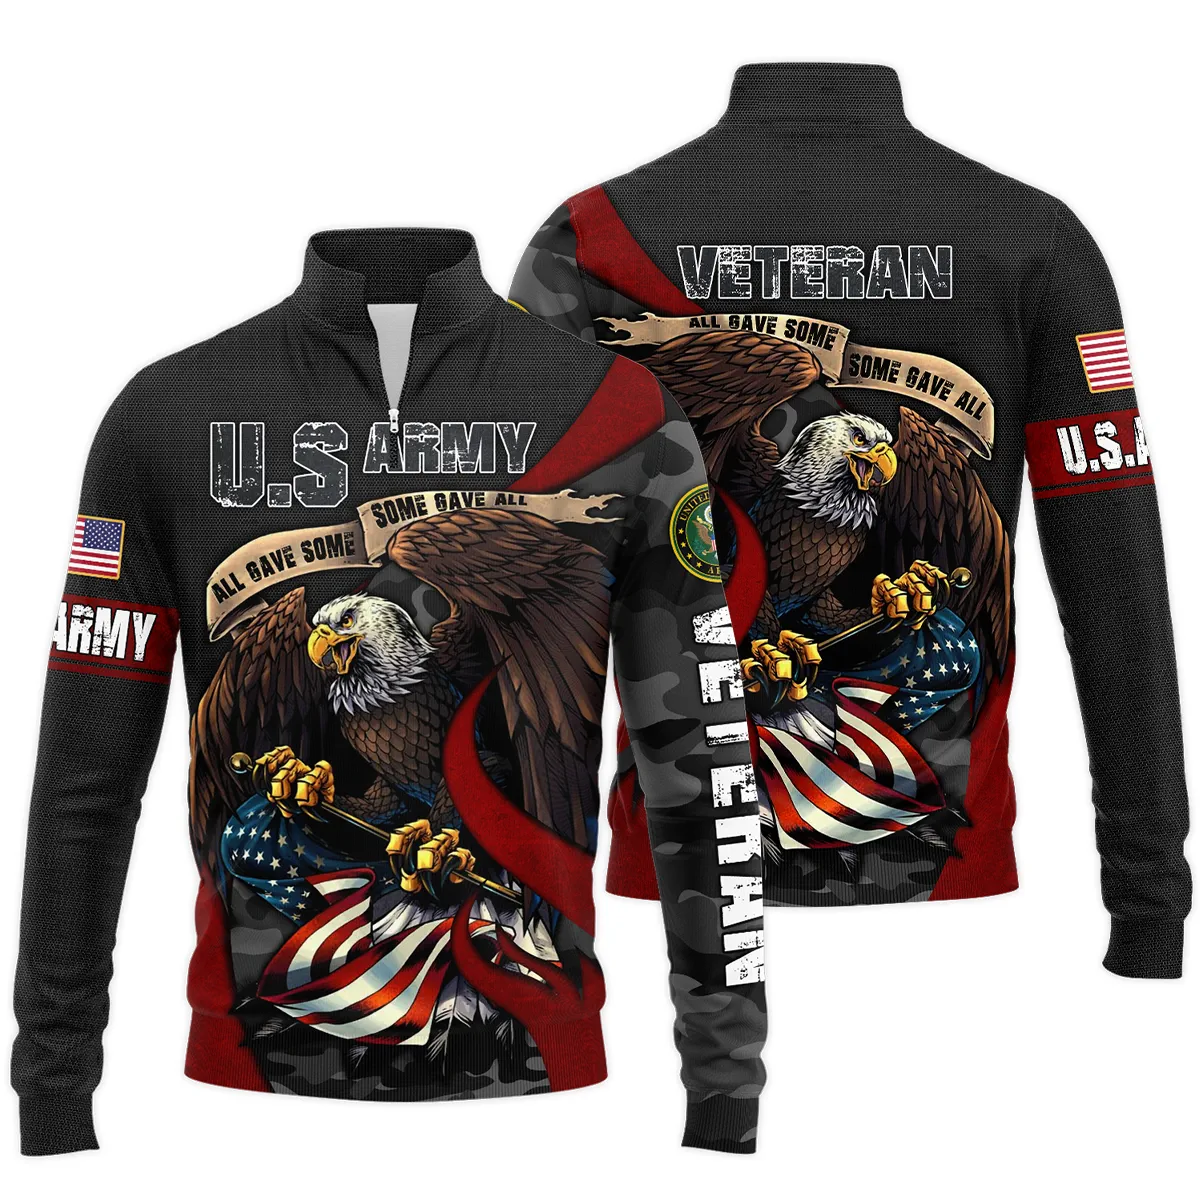 All Gave Some Some Gave All Veteran Eagle Flag U.S. Army Veterans s Quarter-Zip Jacket